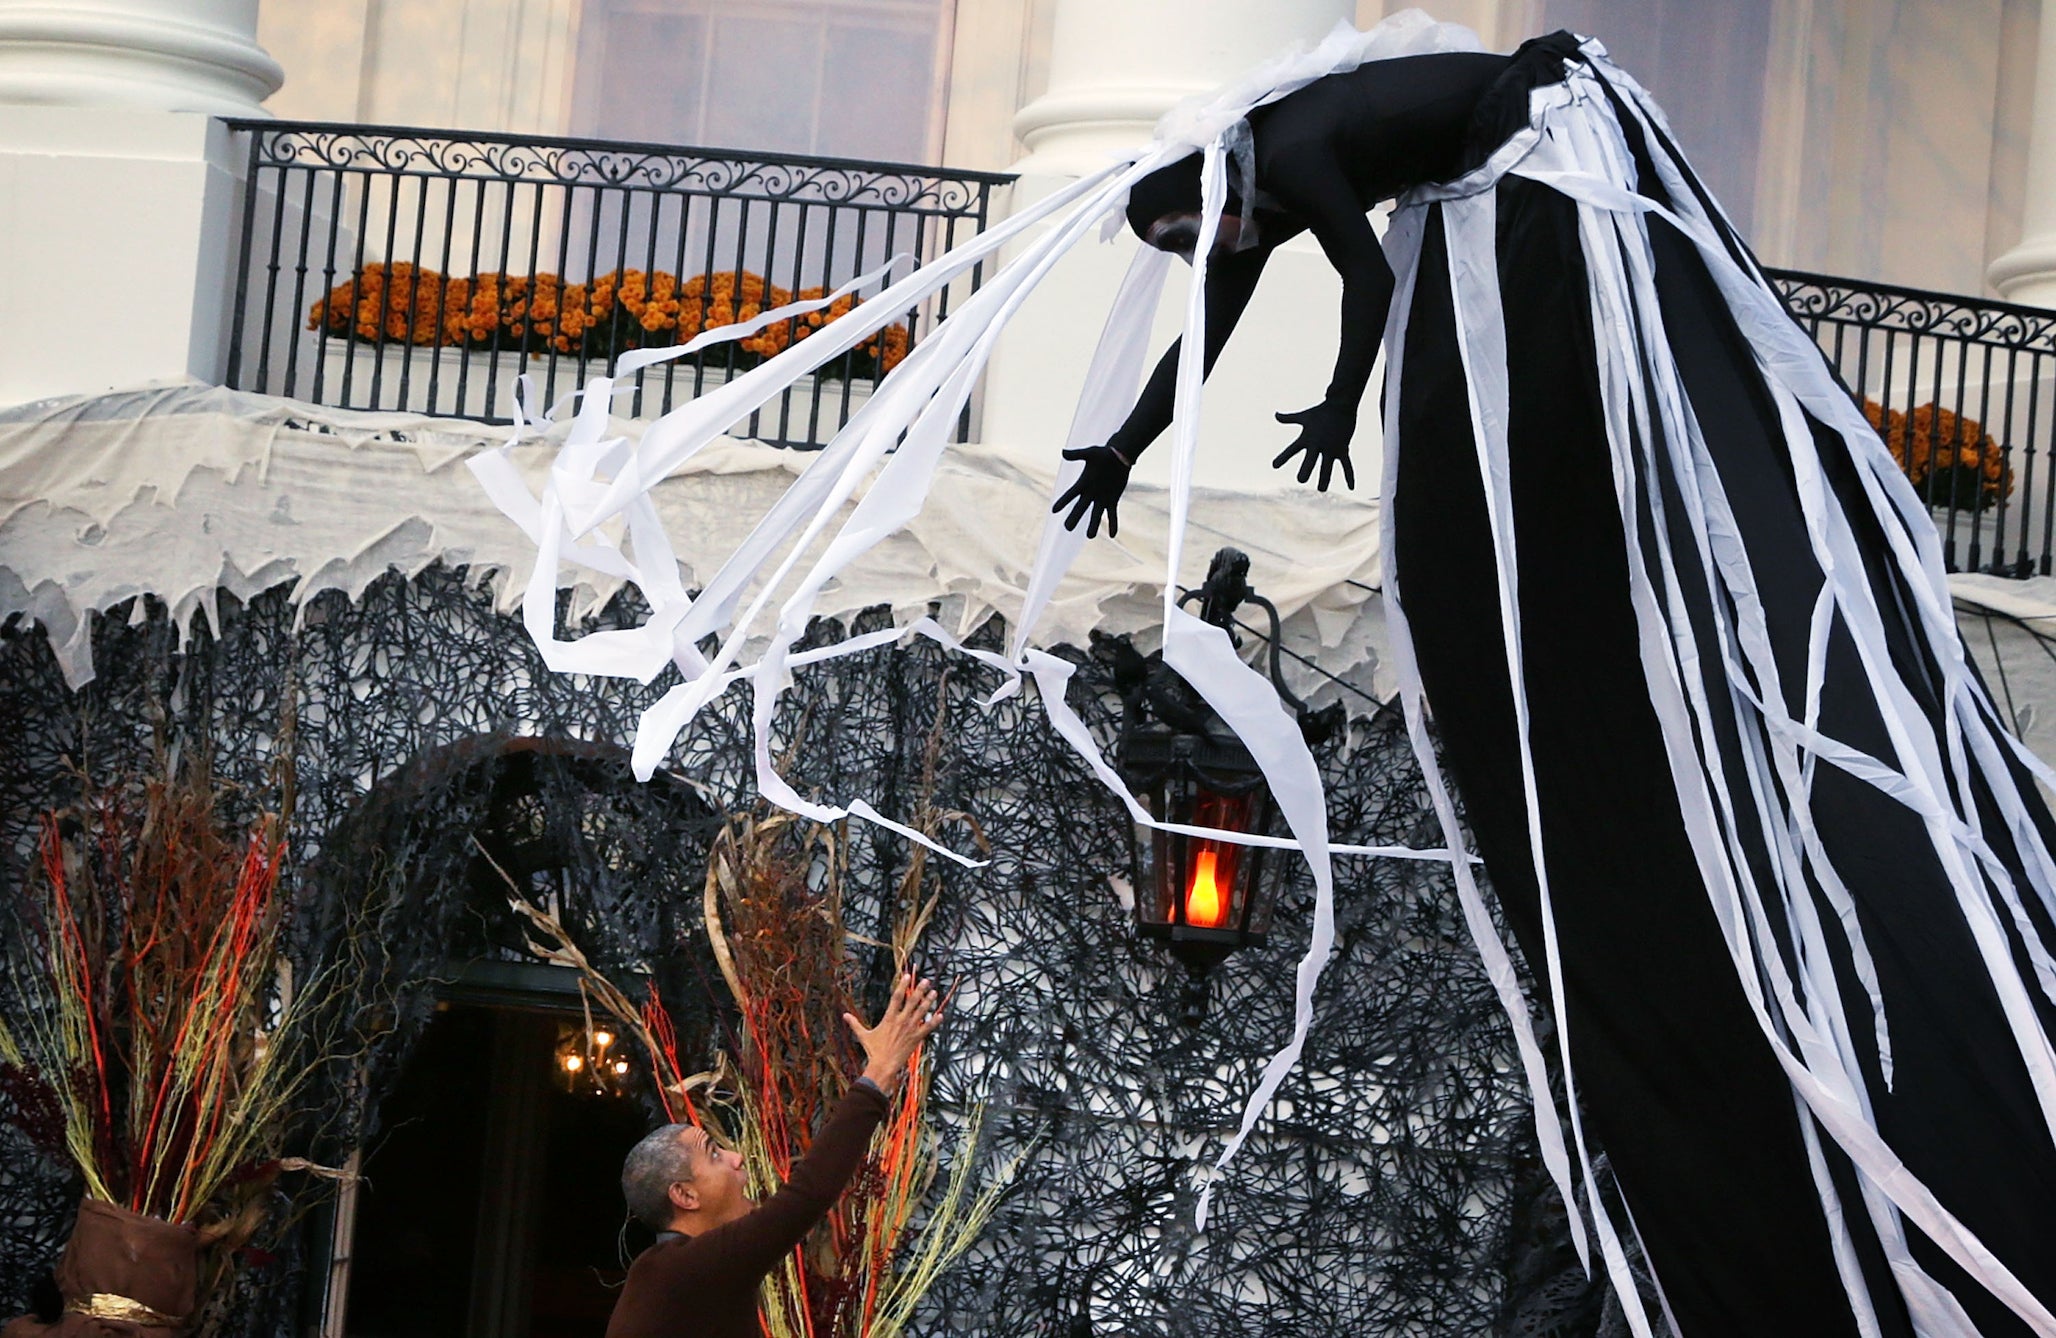 A performer suspended above U.S. President Barack Obama (L) during a Halloween event at the South Lawn of the White House October 30, 2015 in Washington, DC